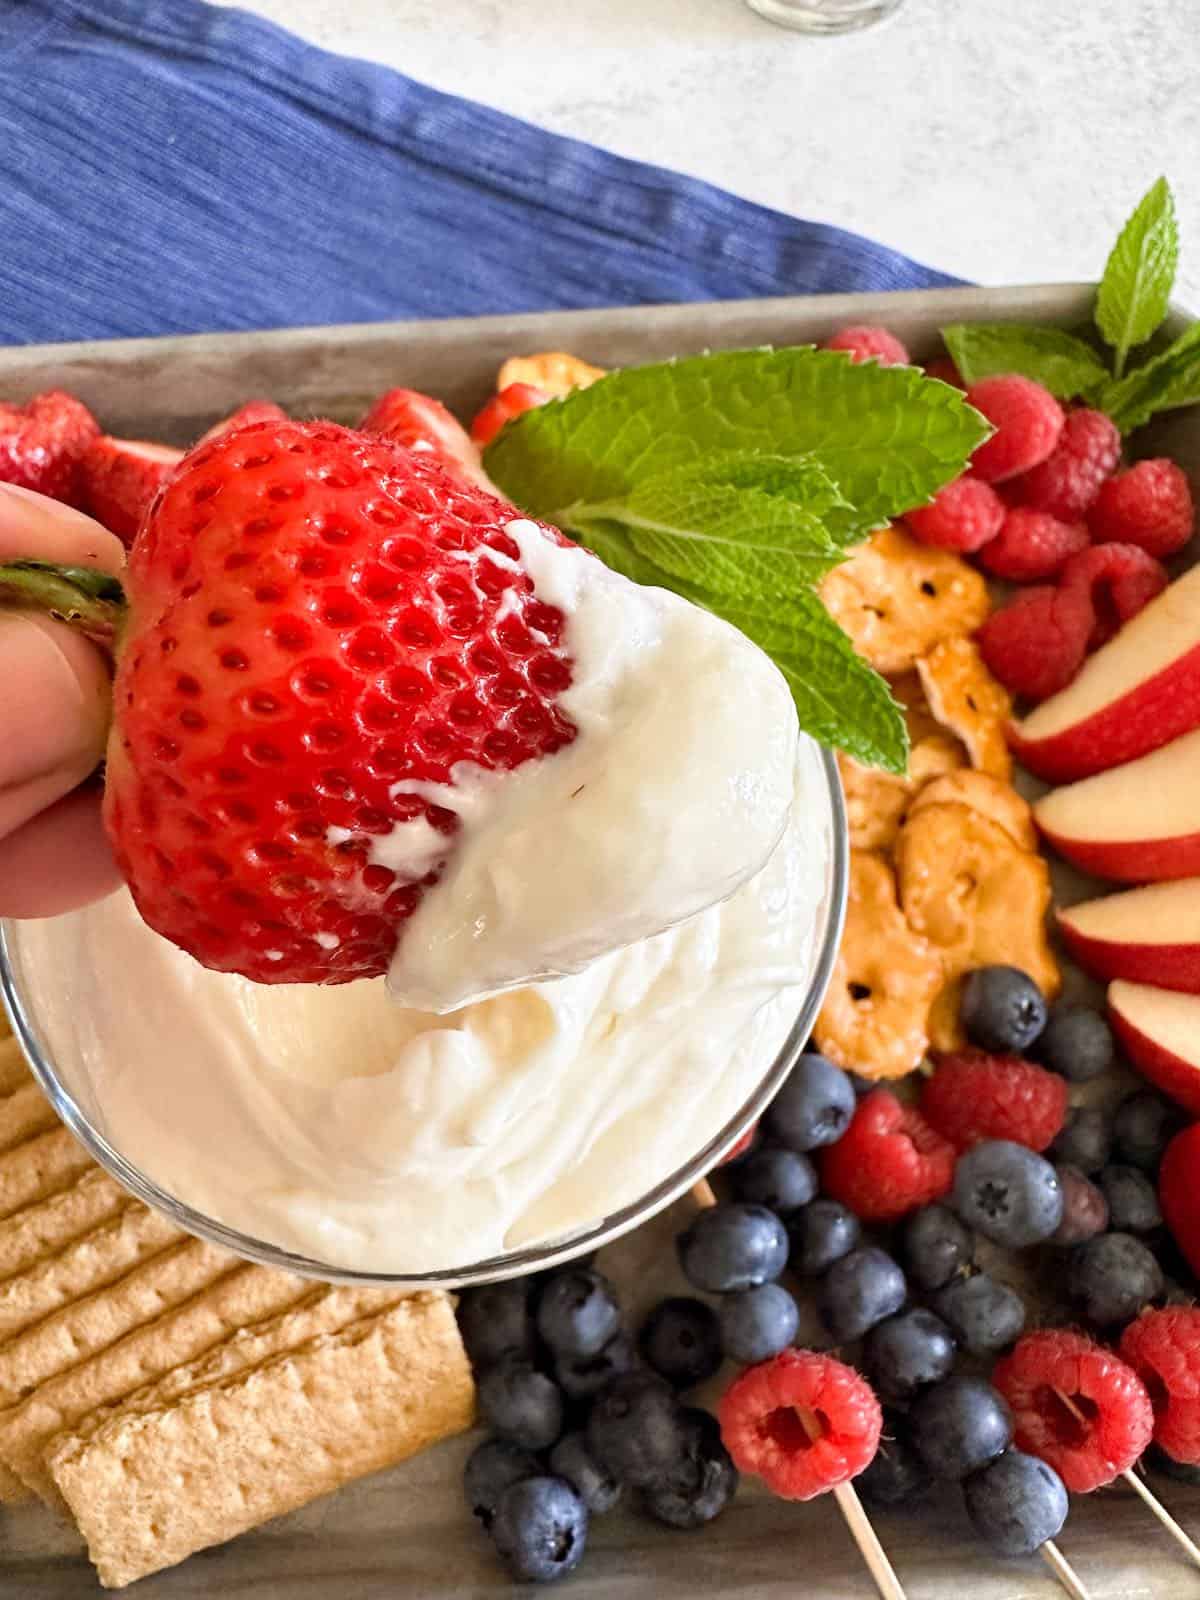 A hand dipping a fresh strawberry into a container of fluff fruit dip.